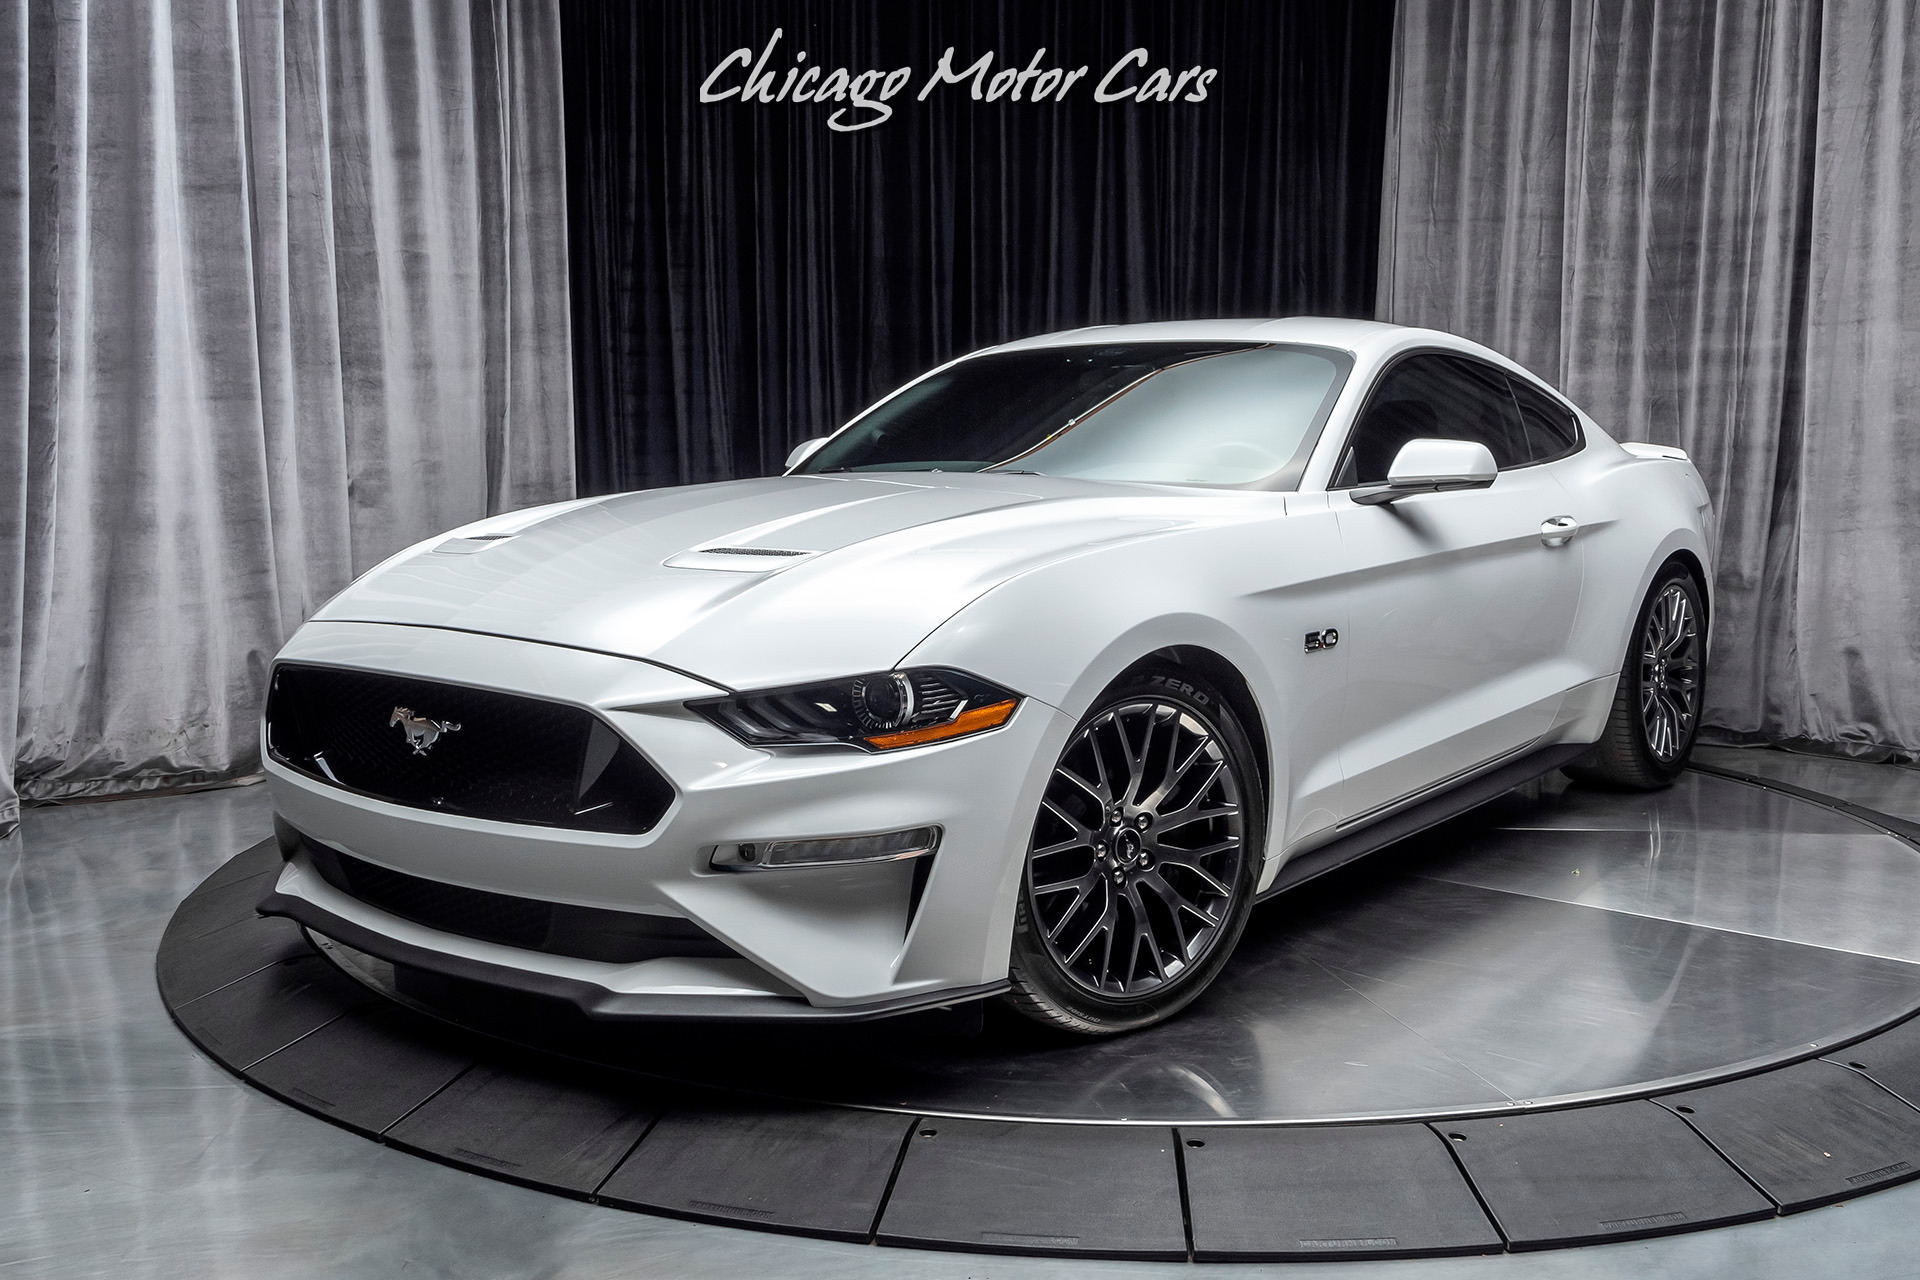 Oxford White 2018 Ford Mustang